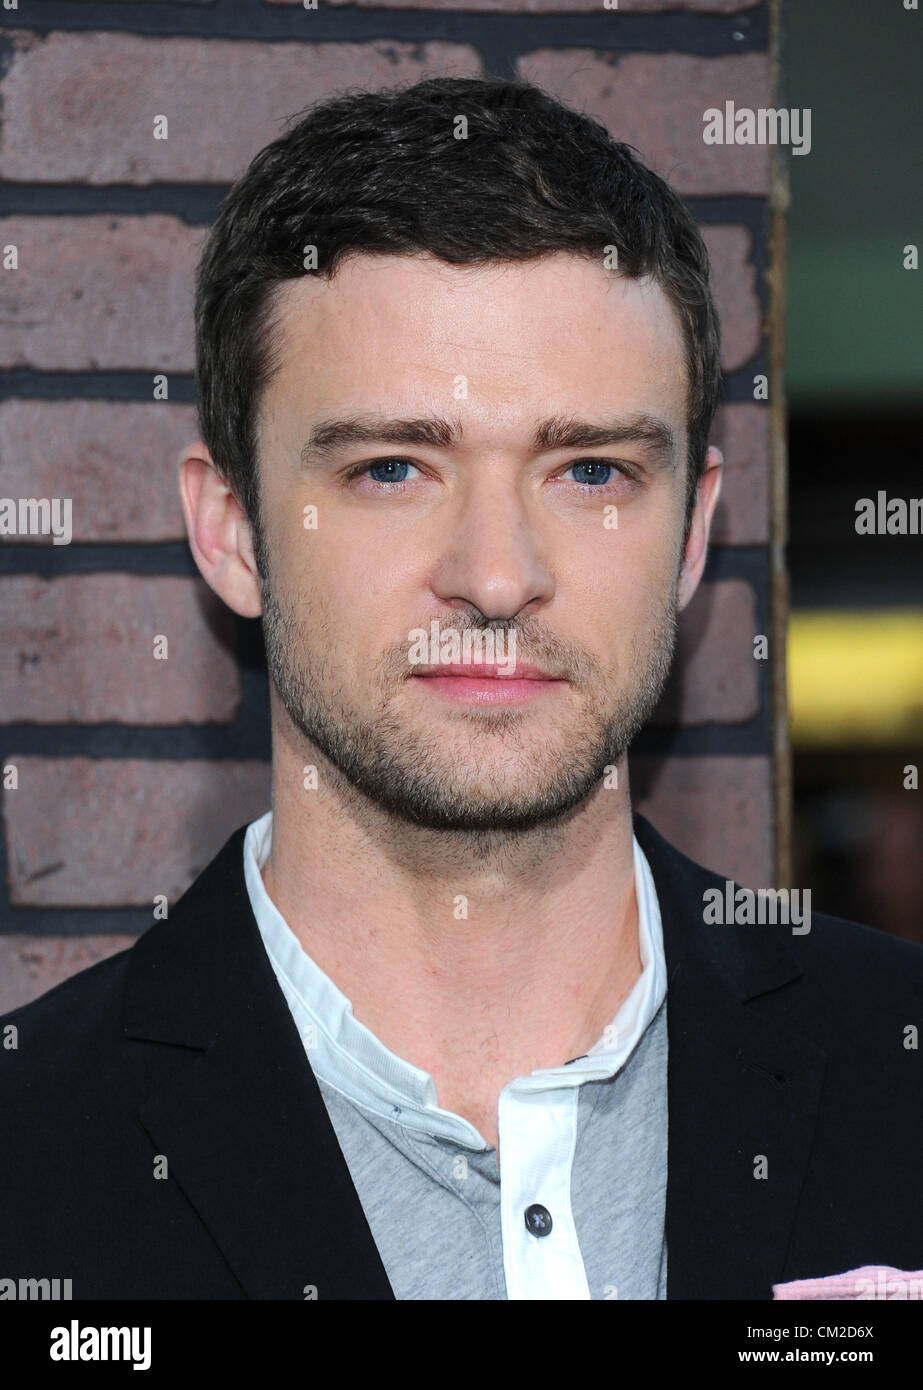 Justin Timberlake at the 'Trouble with the Curve' film premiere in Los Angeles, CA Sept 19th 2012 photo by Sydney Alford Stock Photo